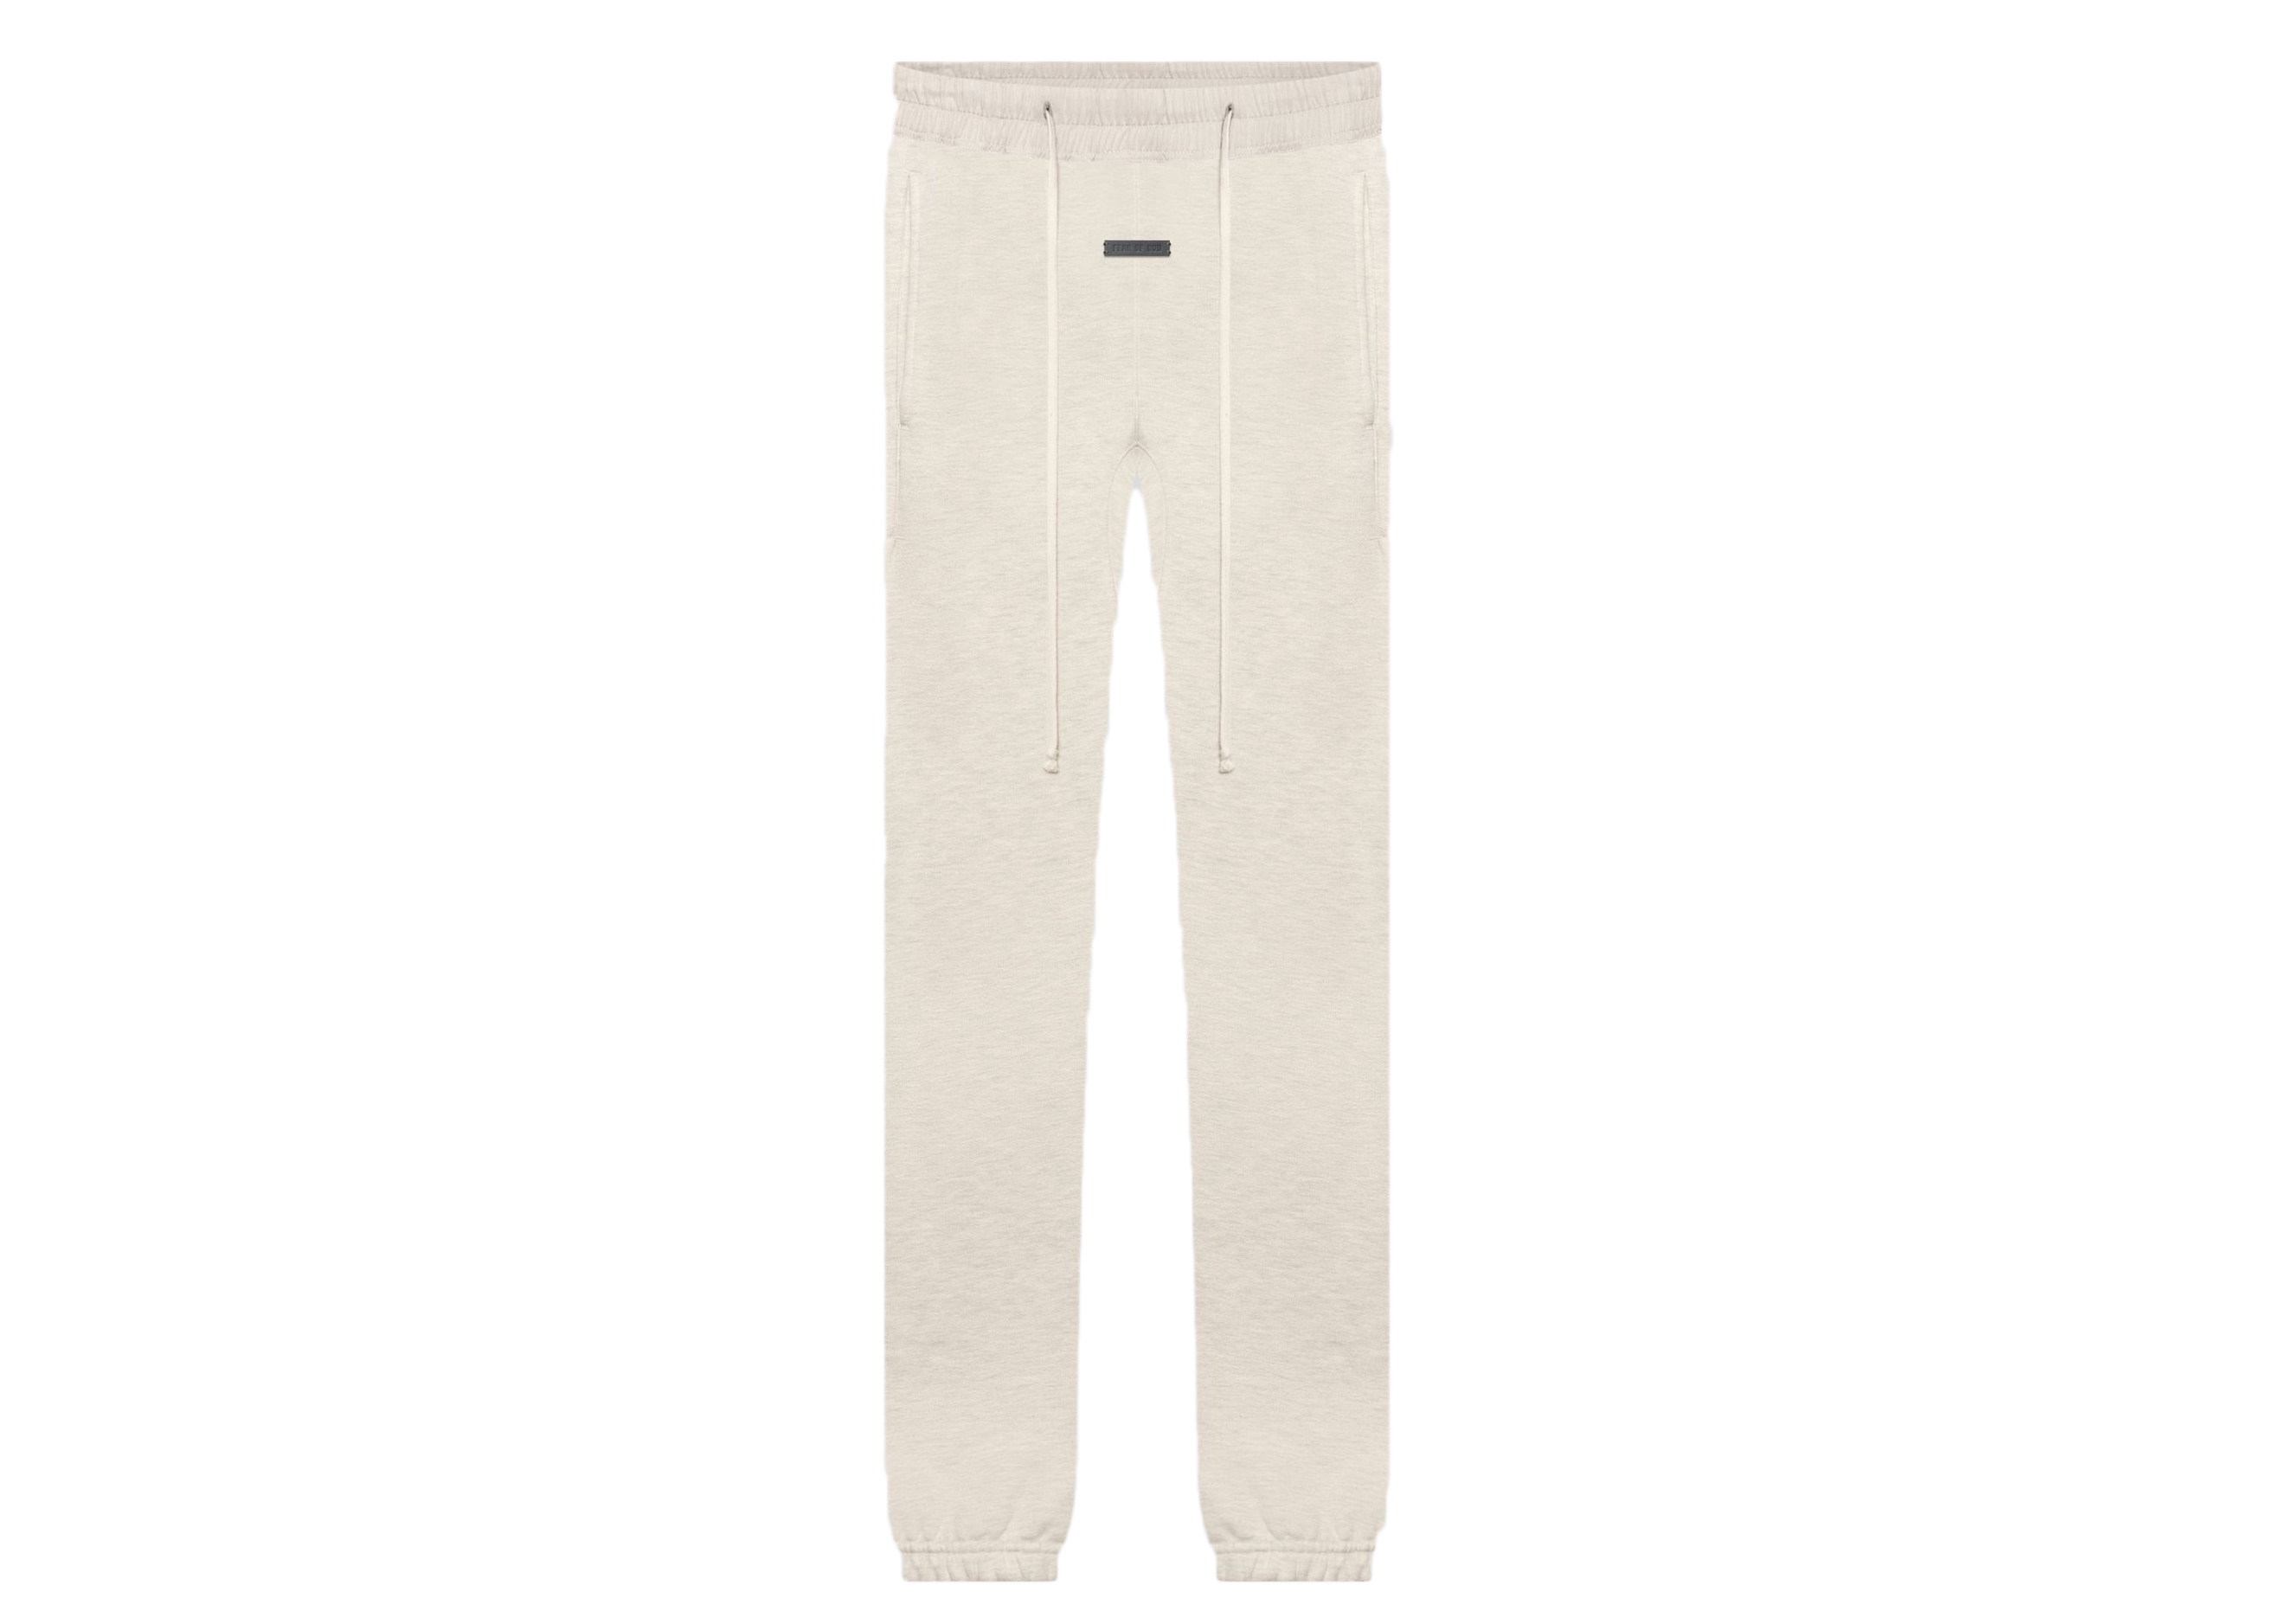 Fear of God Seventh Collection The Vintage Sweatpant Cream Heather 